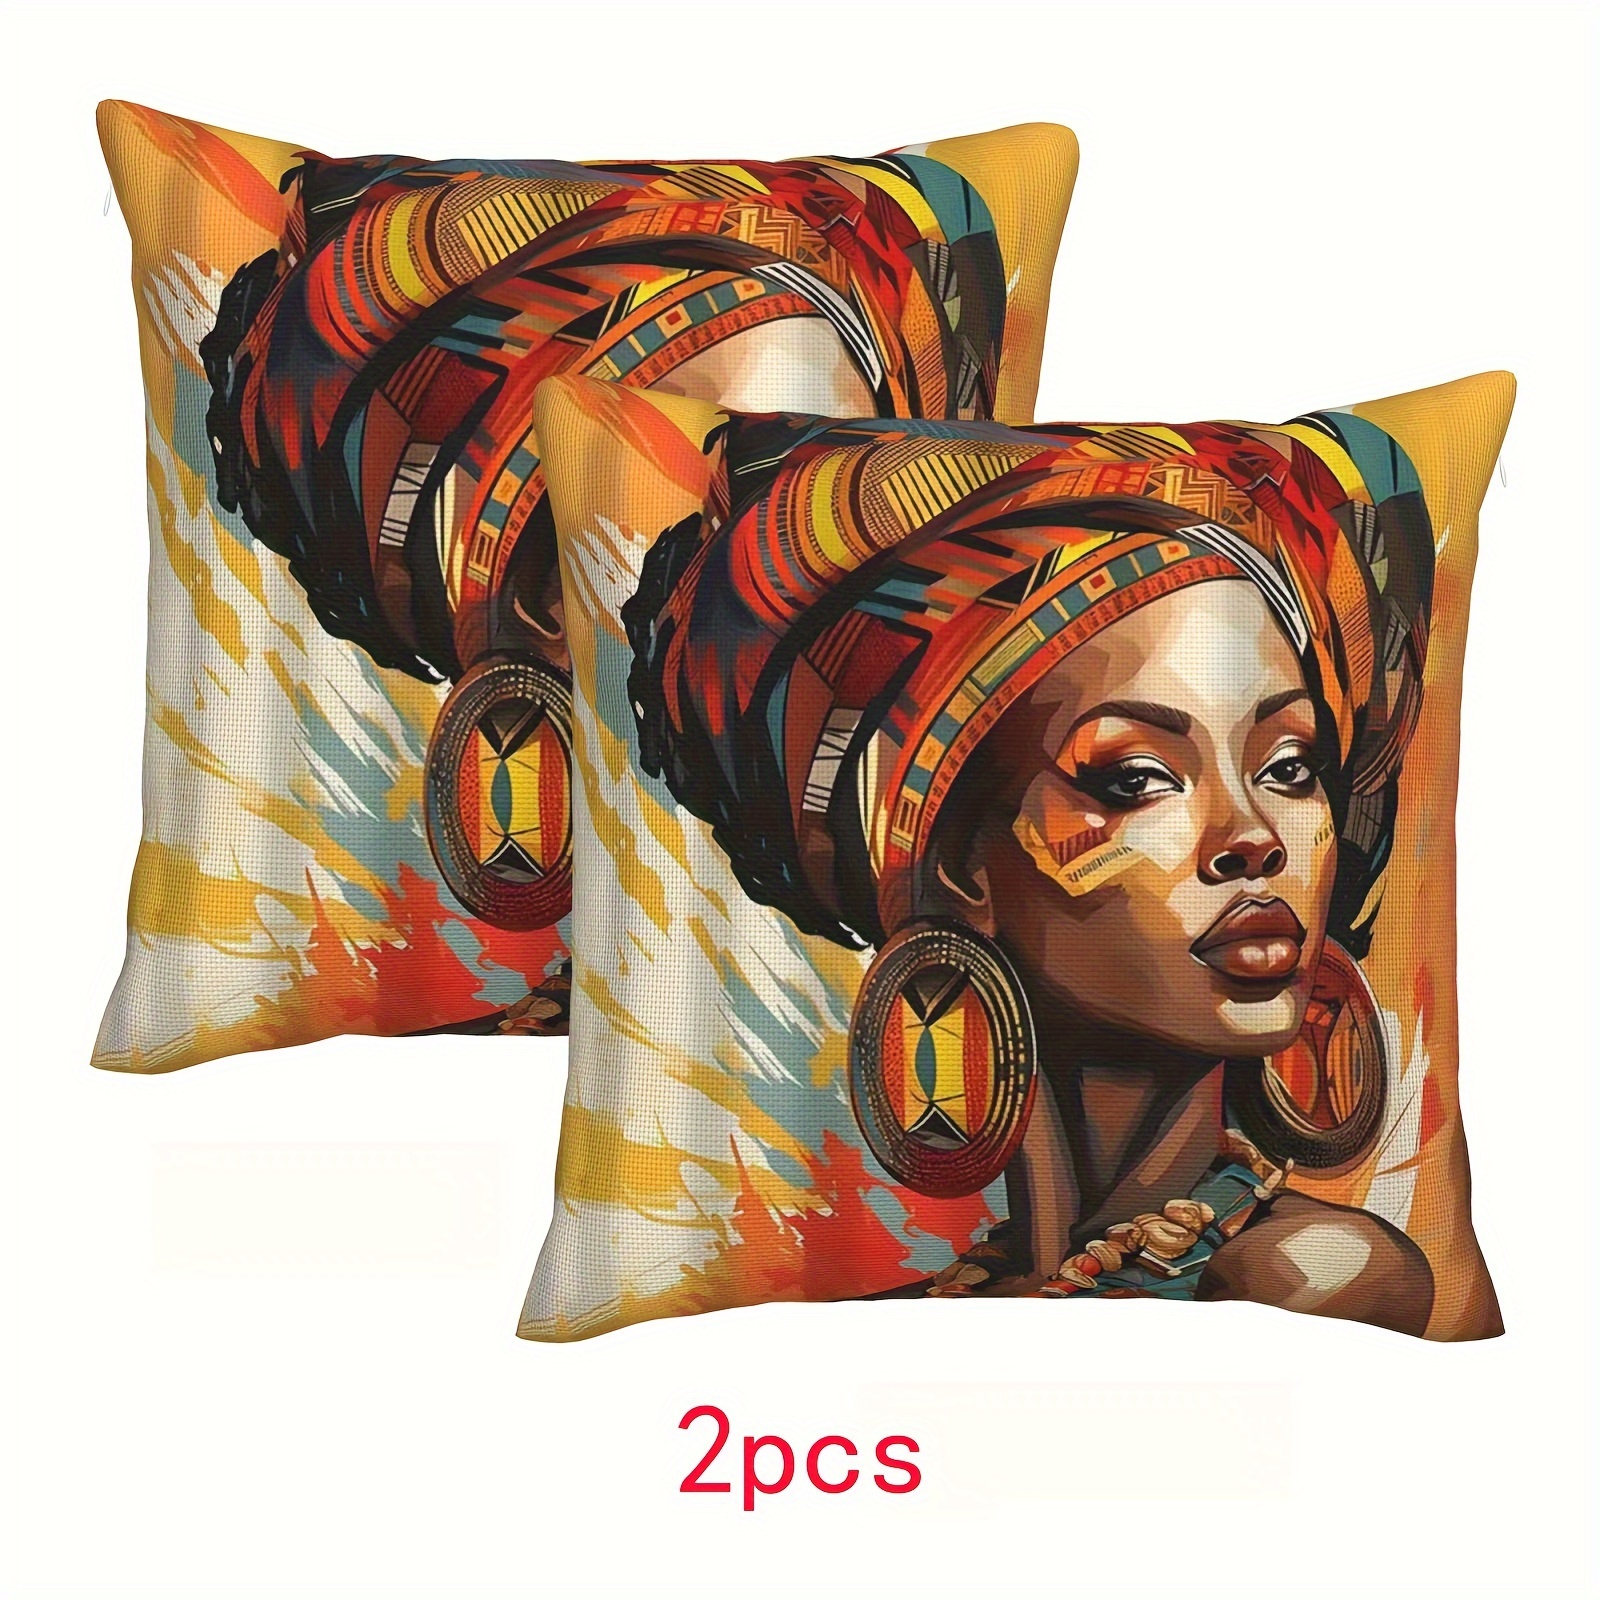 

Traditional African Tribal Figure Throw Pillow Covers Set Of 2, 18x18 Inch, Decorative Woven Polyester Cushion Cases With Zipper For Sofa, Bed, Living Room, Car Decor - Machine Washable